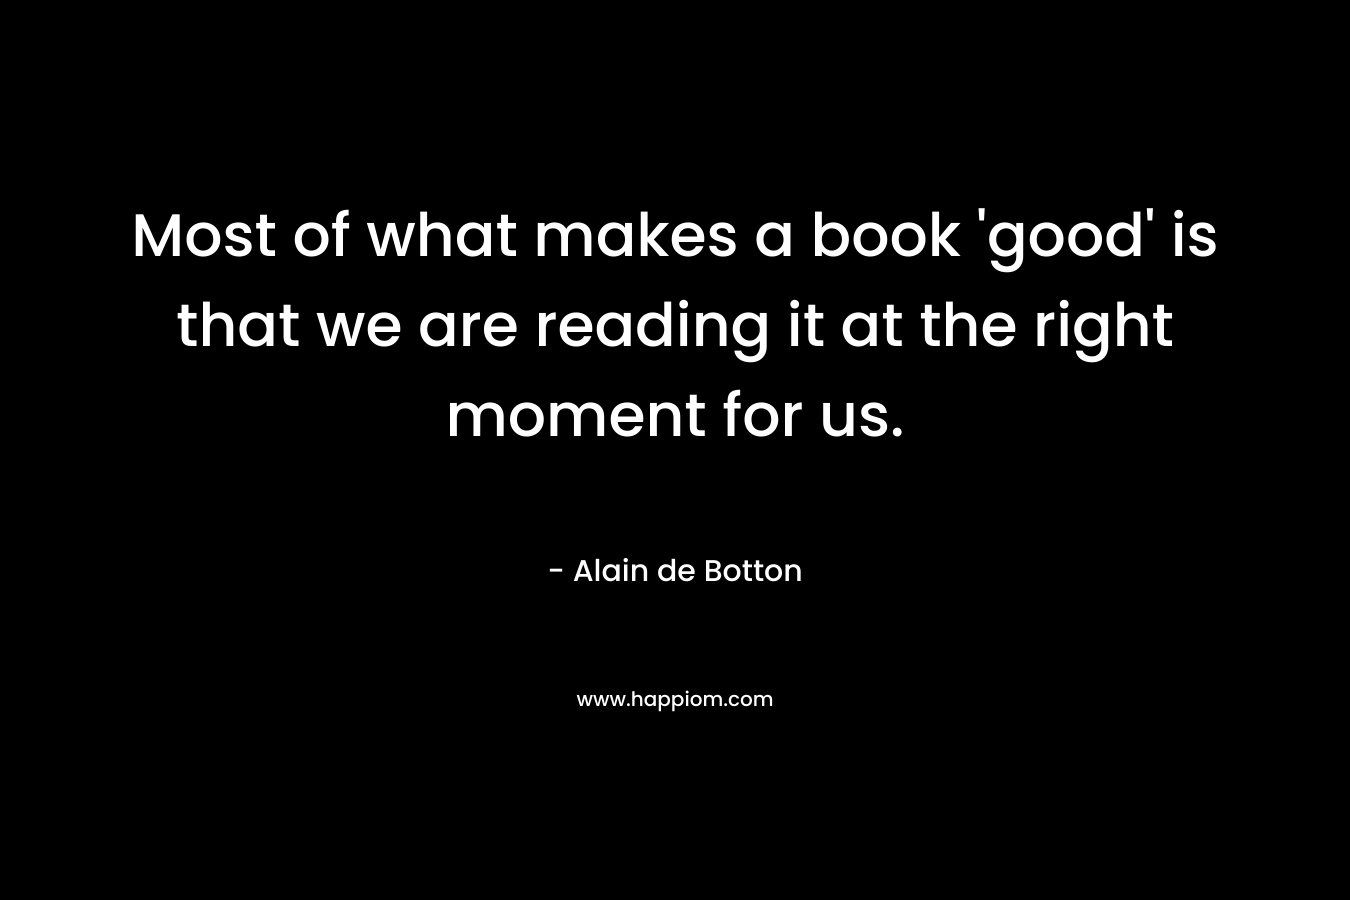 Most of what makes a book 'good' is that we are reading it at the right moment for us.